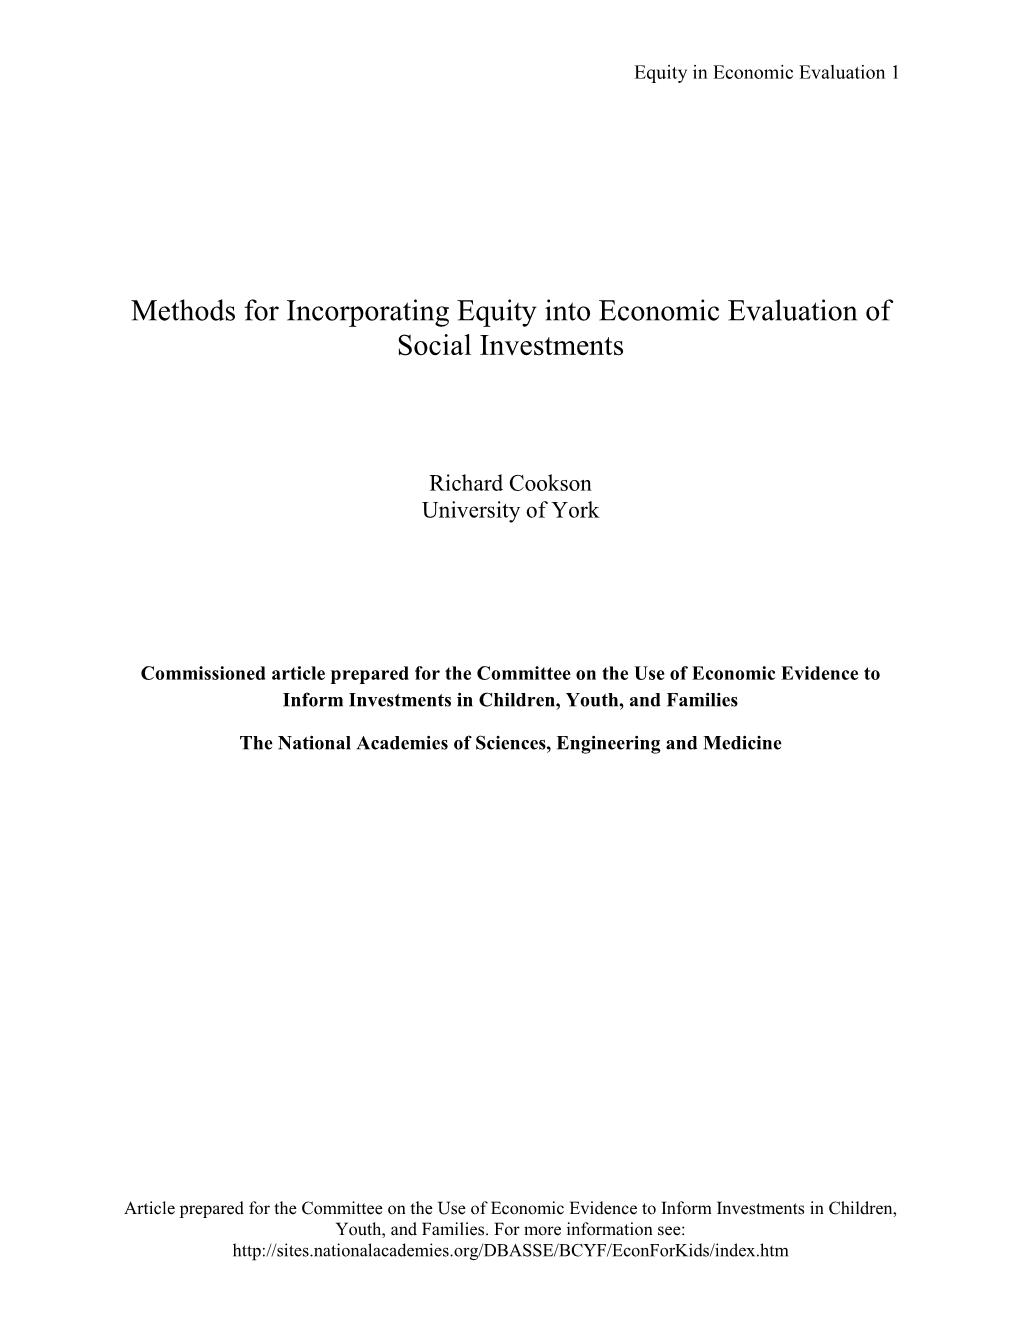 Methods for Incorporating Equity Into Economic Evaluation of Social Investments